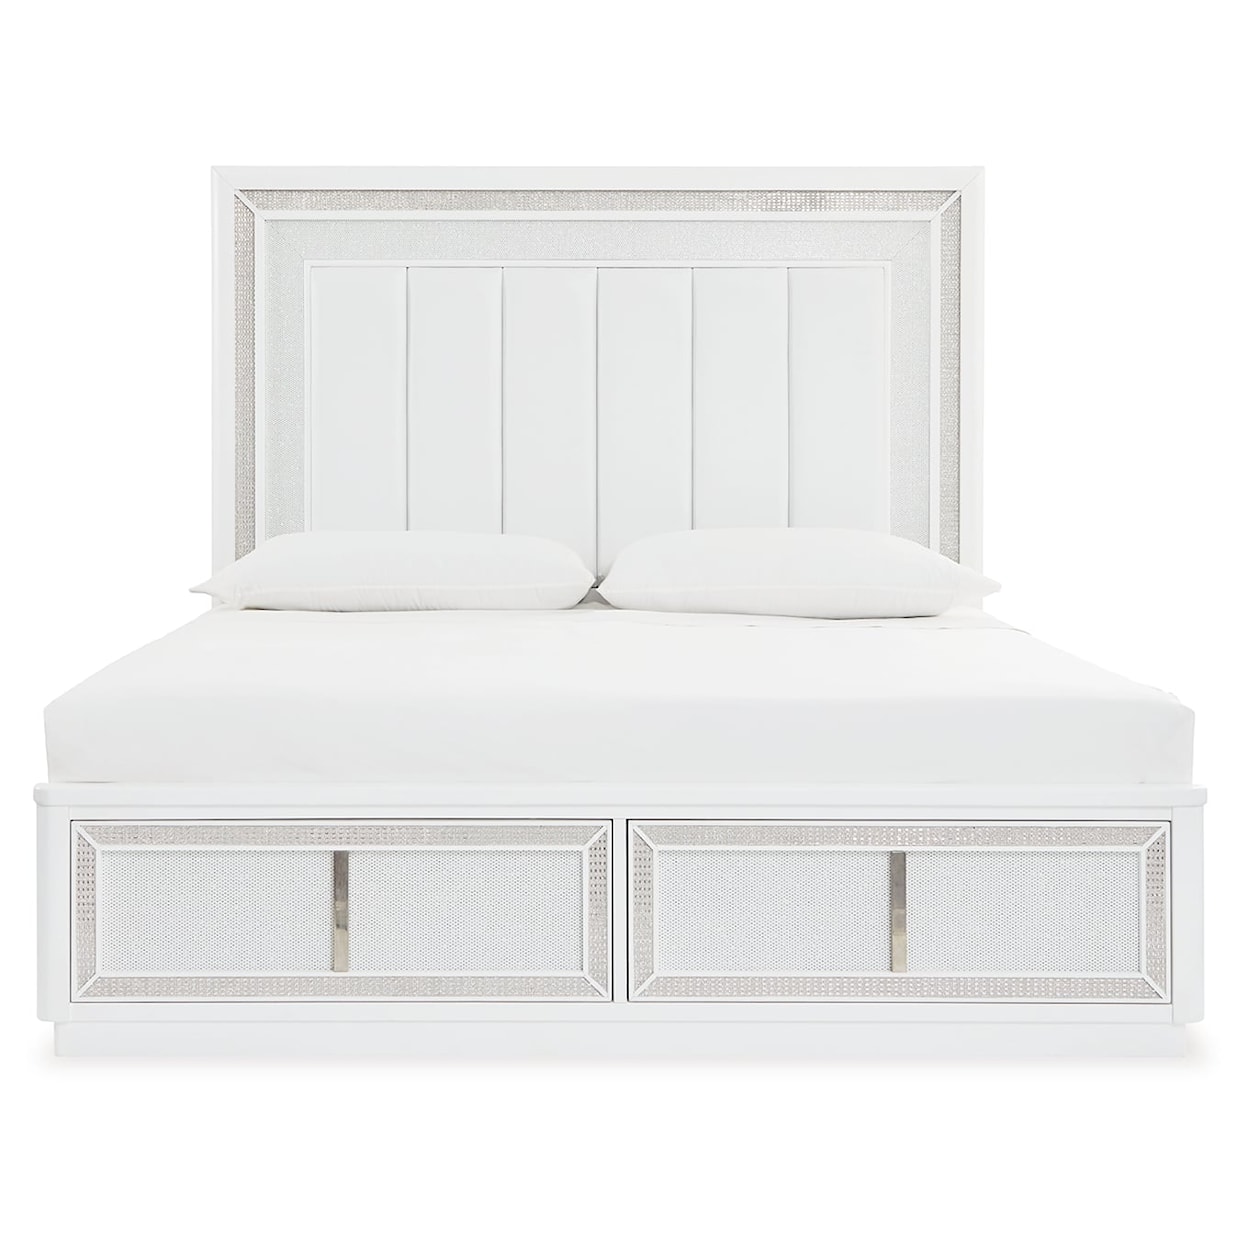 Signature Design Chalanna Queen Upholstered Storage Bed